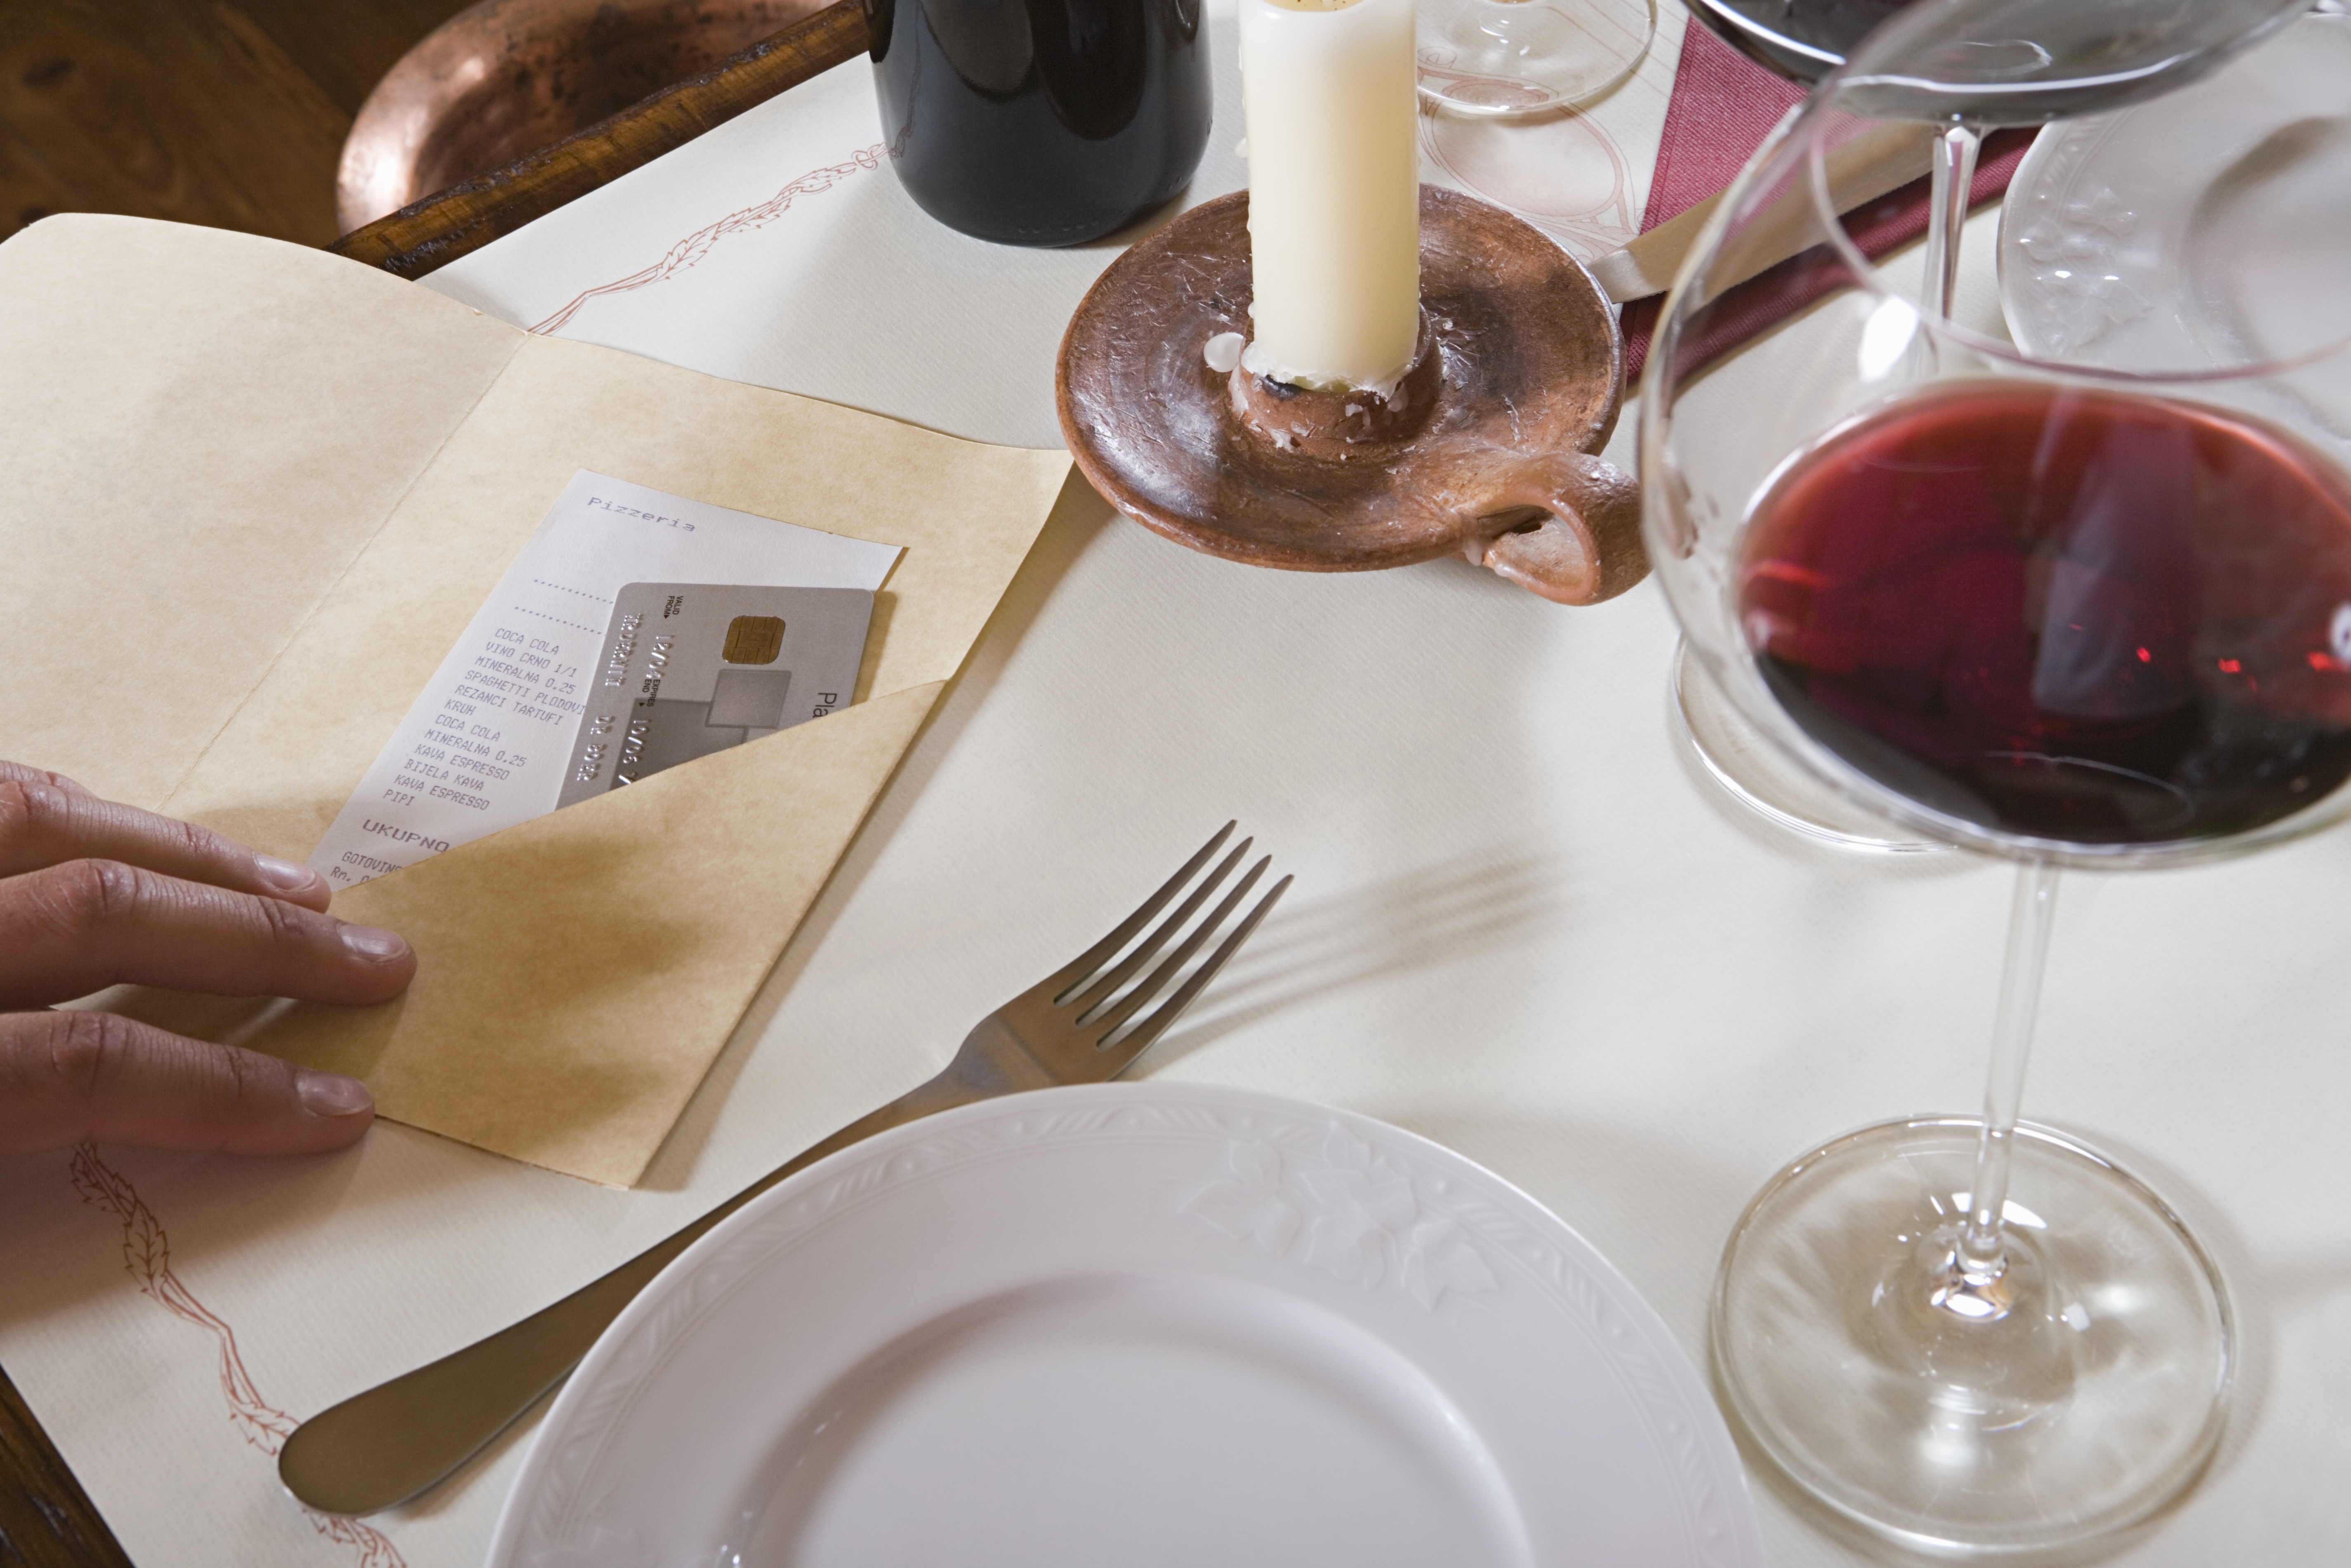 A white table set with a white plate, a fork, a glass of red wine, a candle, and an a manilla bill fold with a restaurant check in it; to the left of the frame, a hand is placing a credit card into the manila folder. 